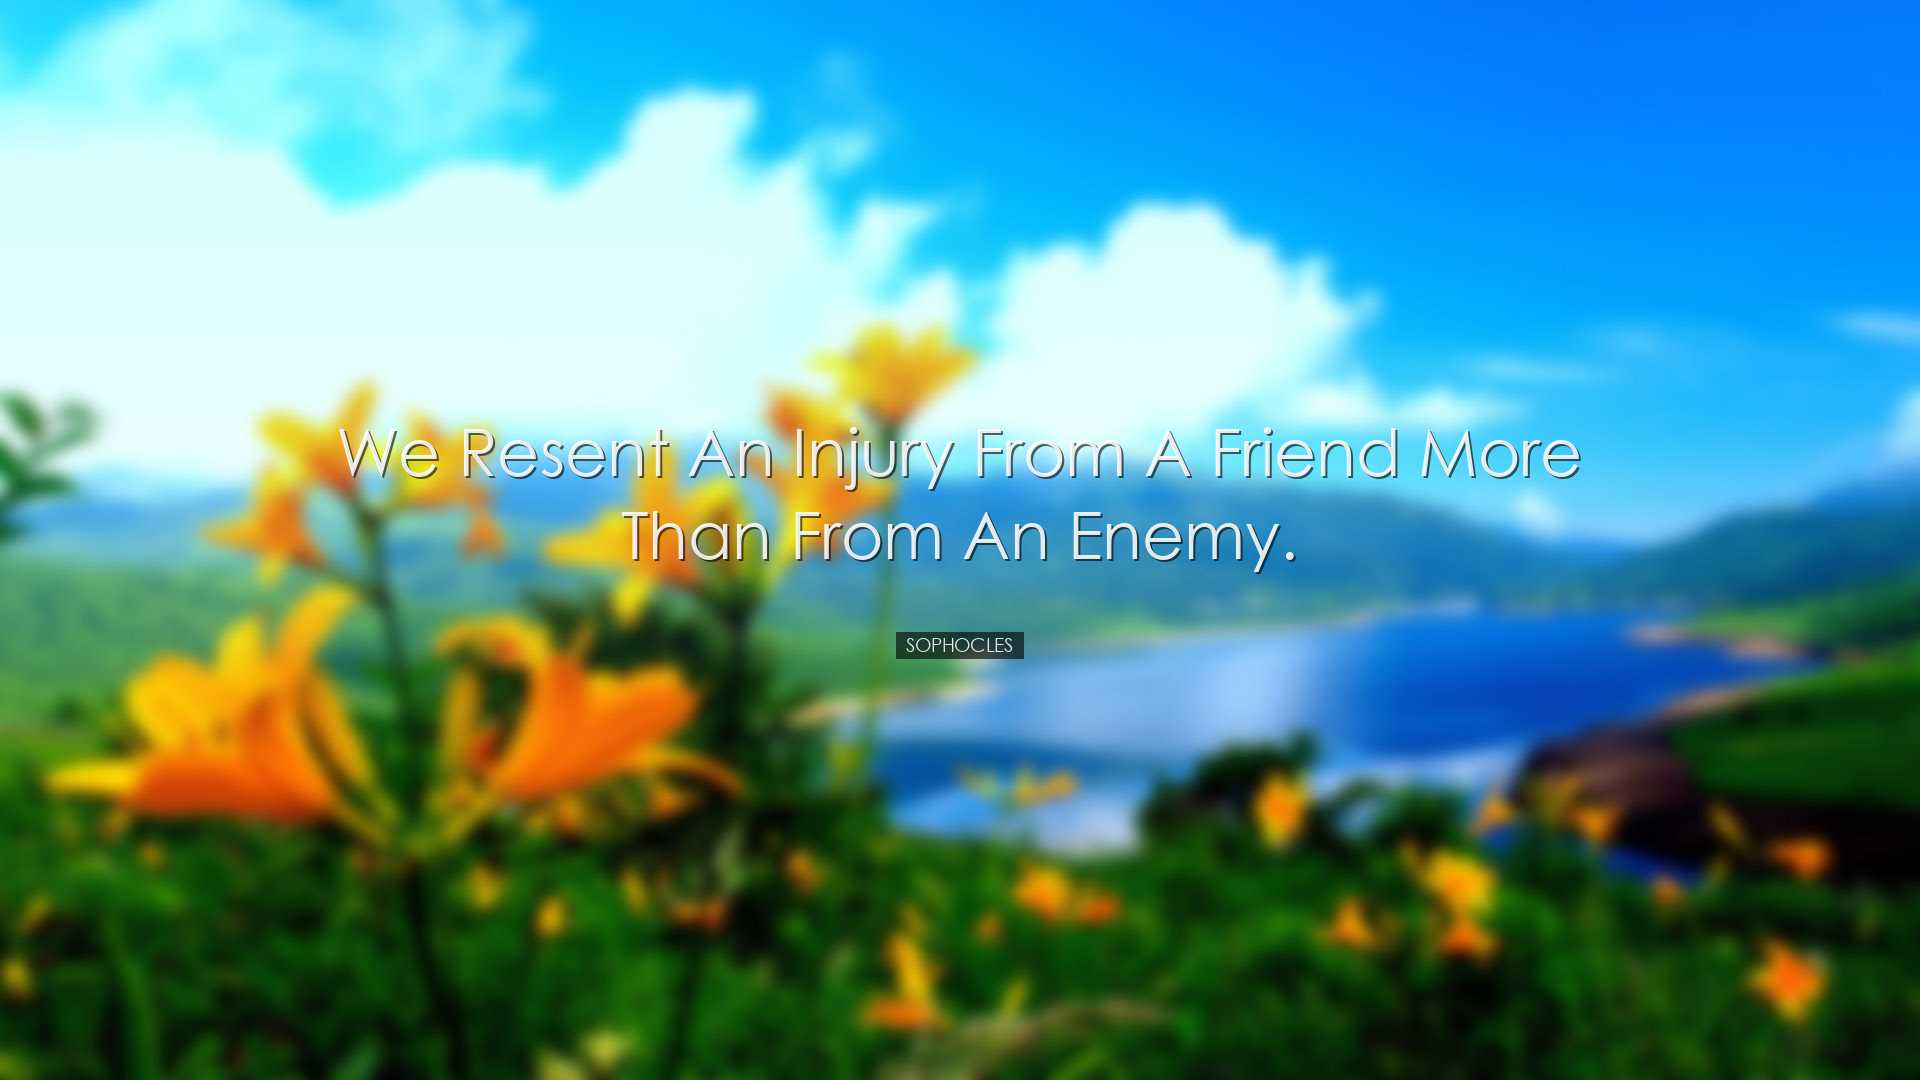 We resent an injury from a friend more than from an enemy. - Sopho